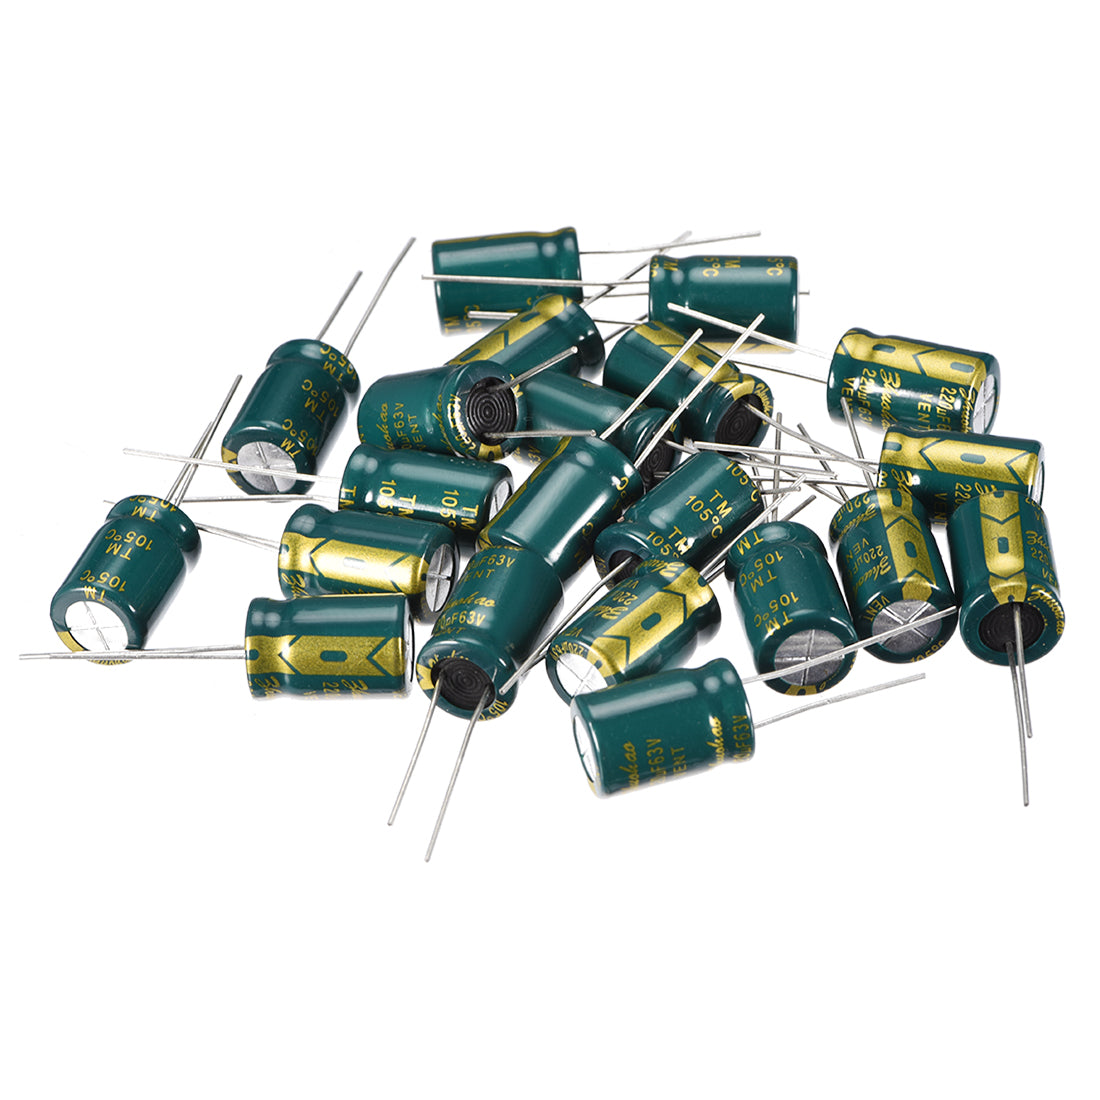 uxcell Uxcell Aluminum Radial Electrolytic Capacitor Low ESR 220uF 63V 105 Celsius 3000H Life 10x16mm High Ripple Current Low Impedance 20pcs Green